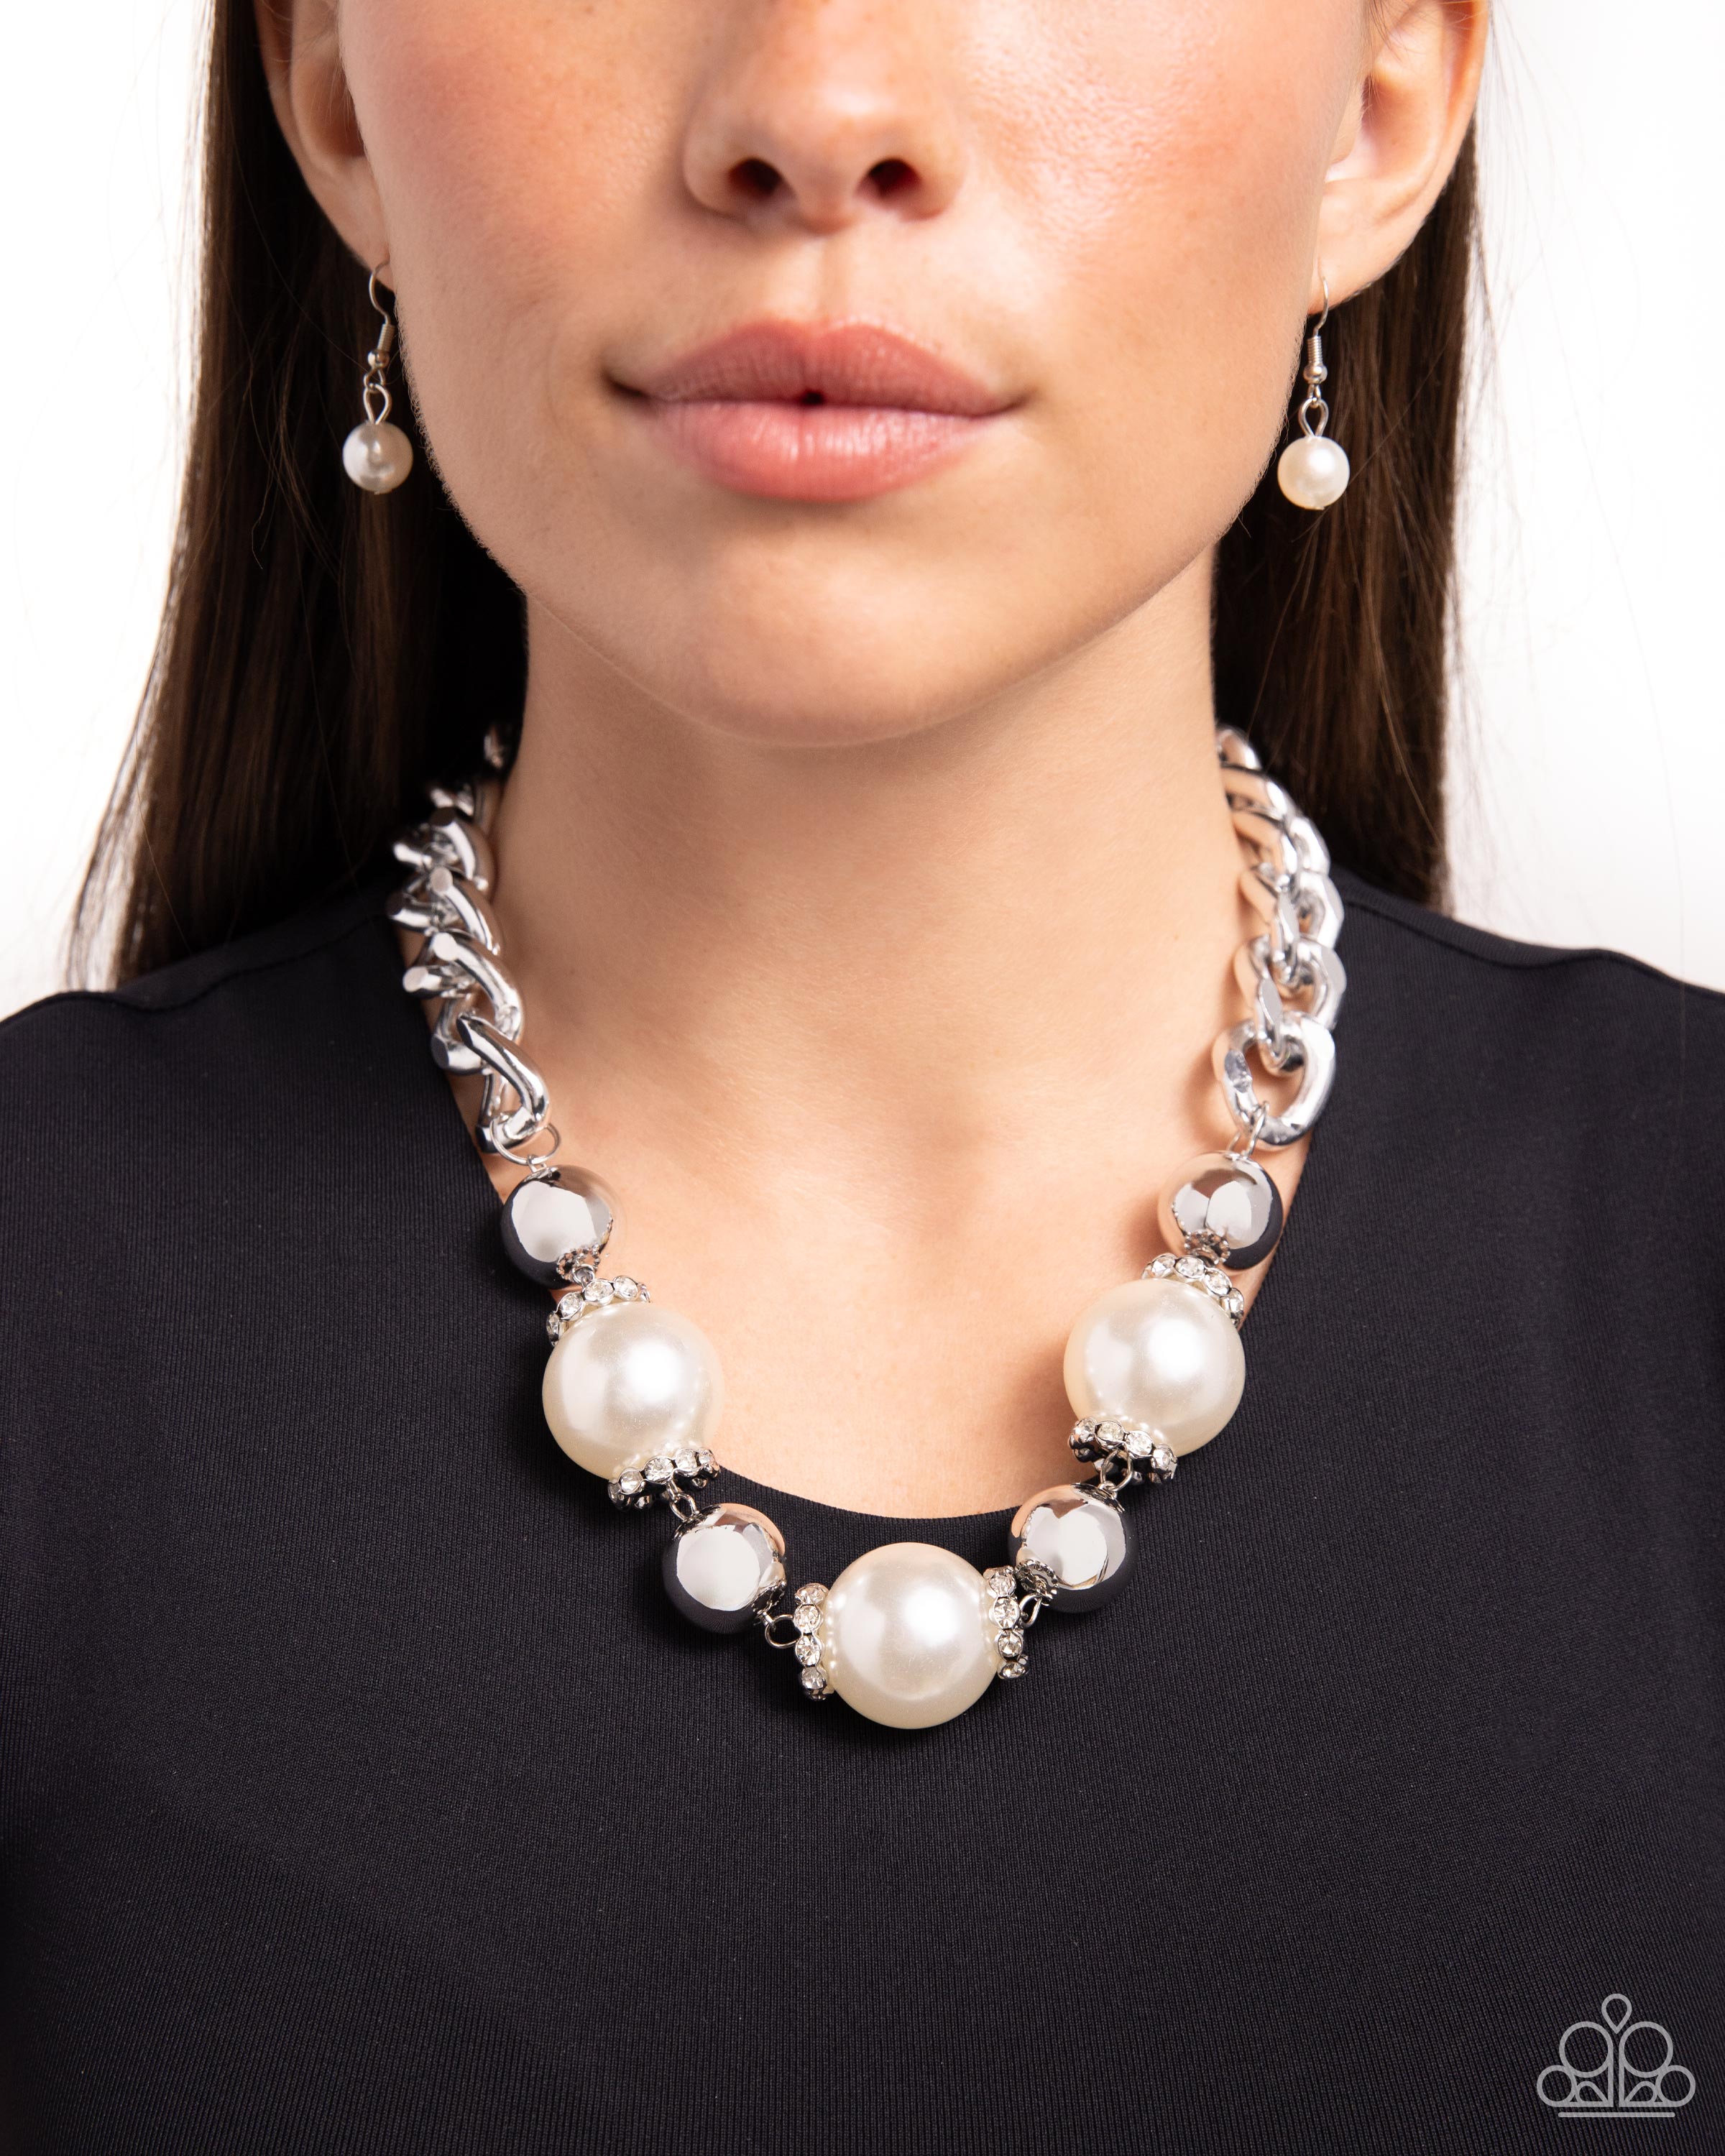 GENEROUSLY GLOSSY WHITE-NECKLACE